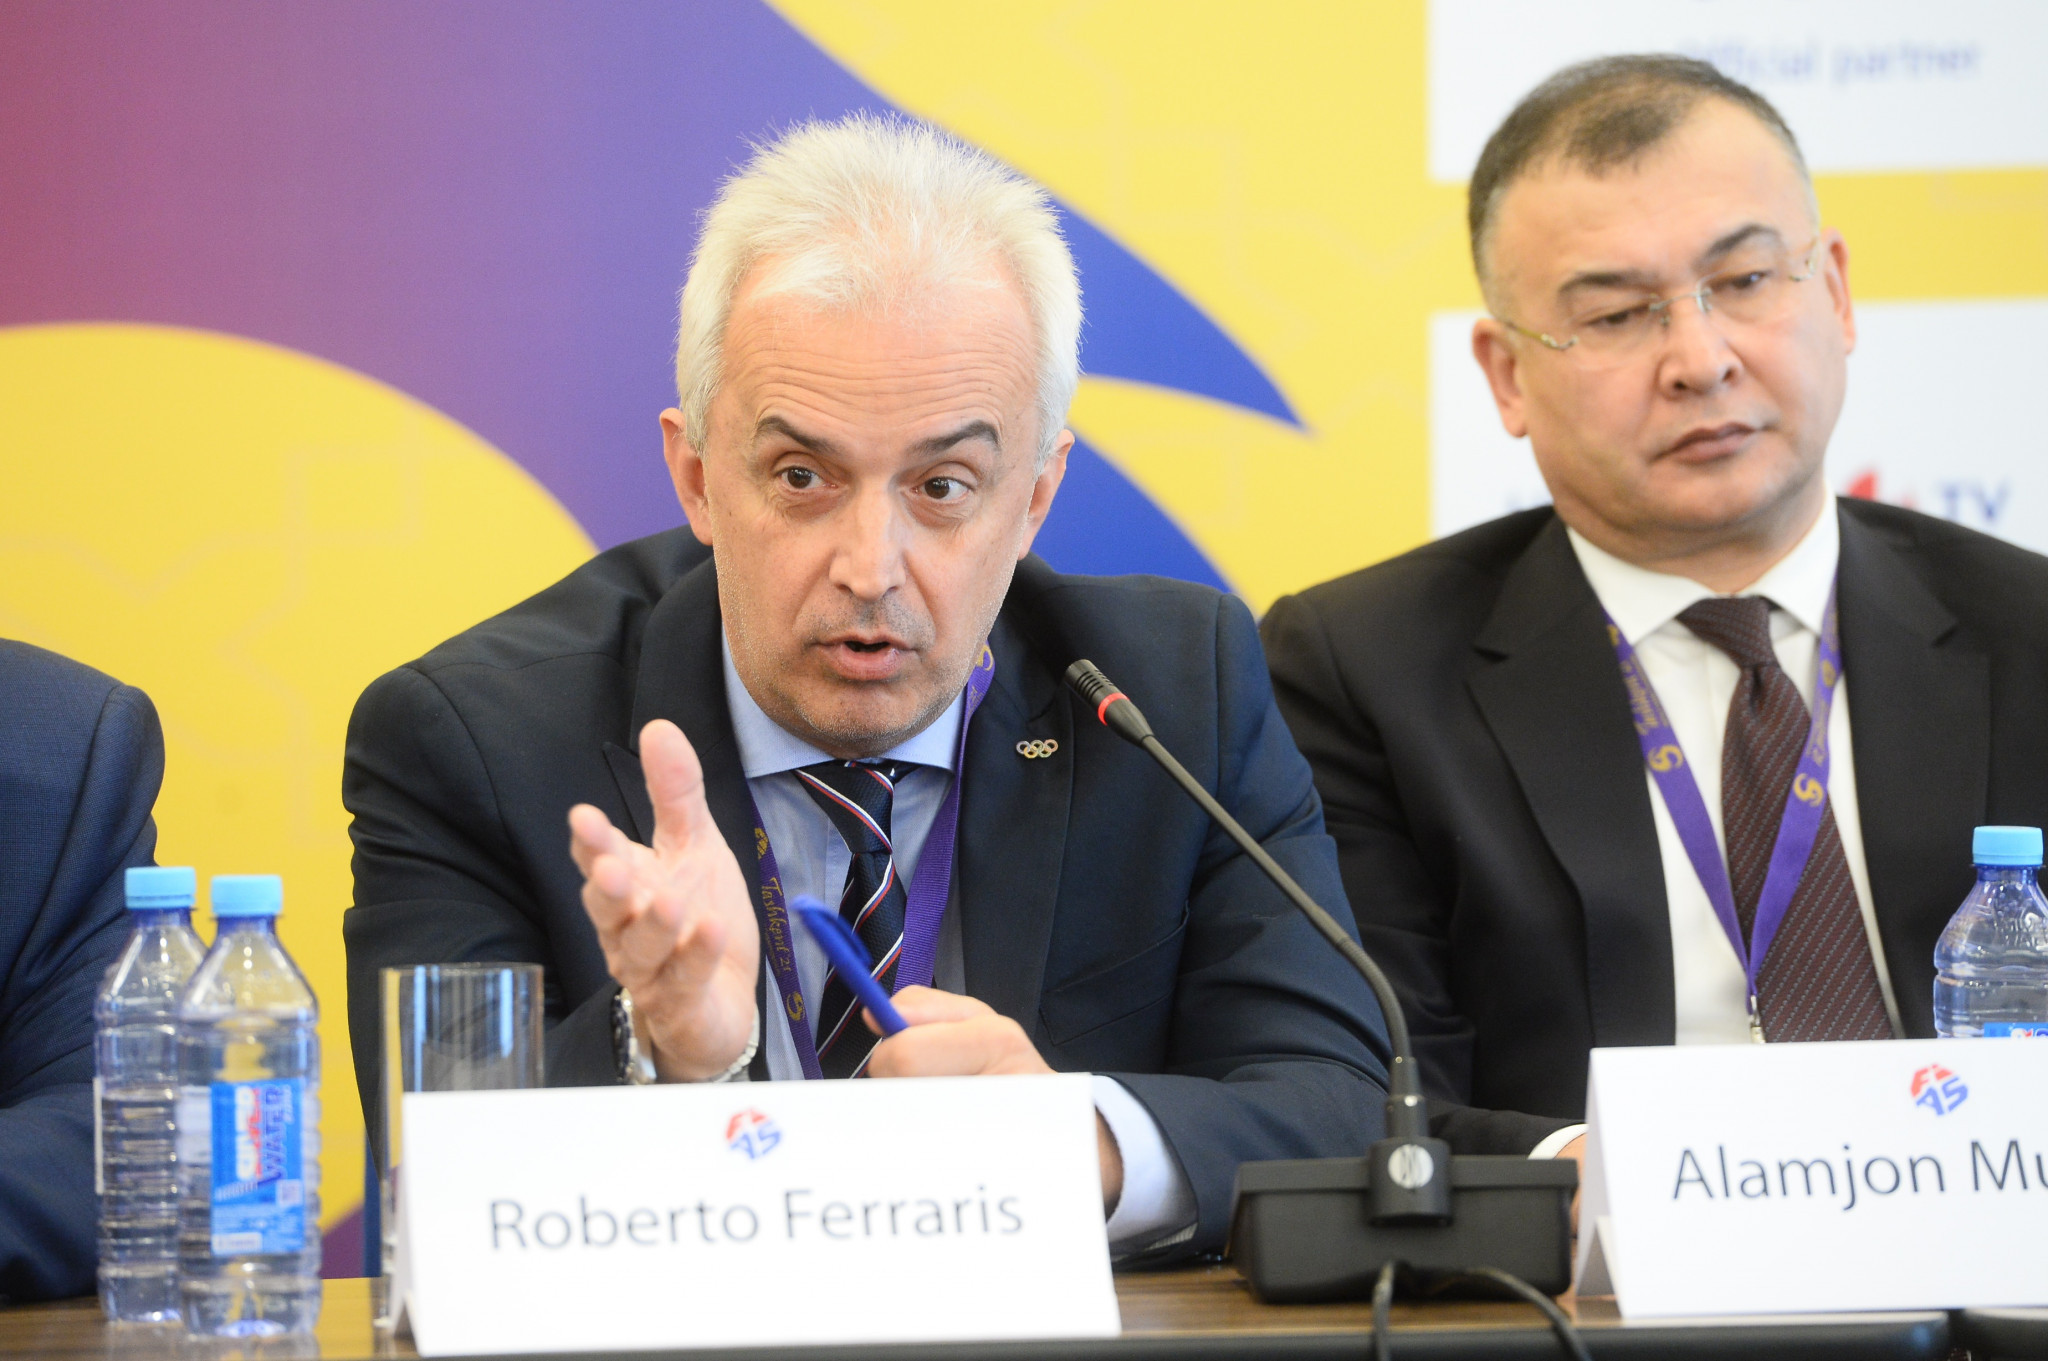 FIAS secretary general Roberto Ferraris has expressed doubts over whether Turkmenistan will be able to stage next year's World Sambo Championships ©FIAS